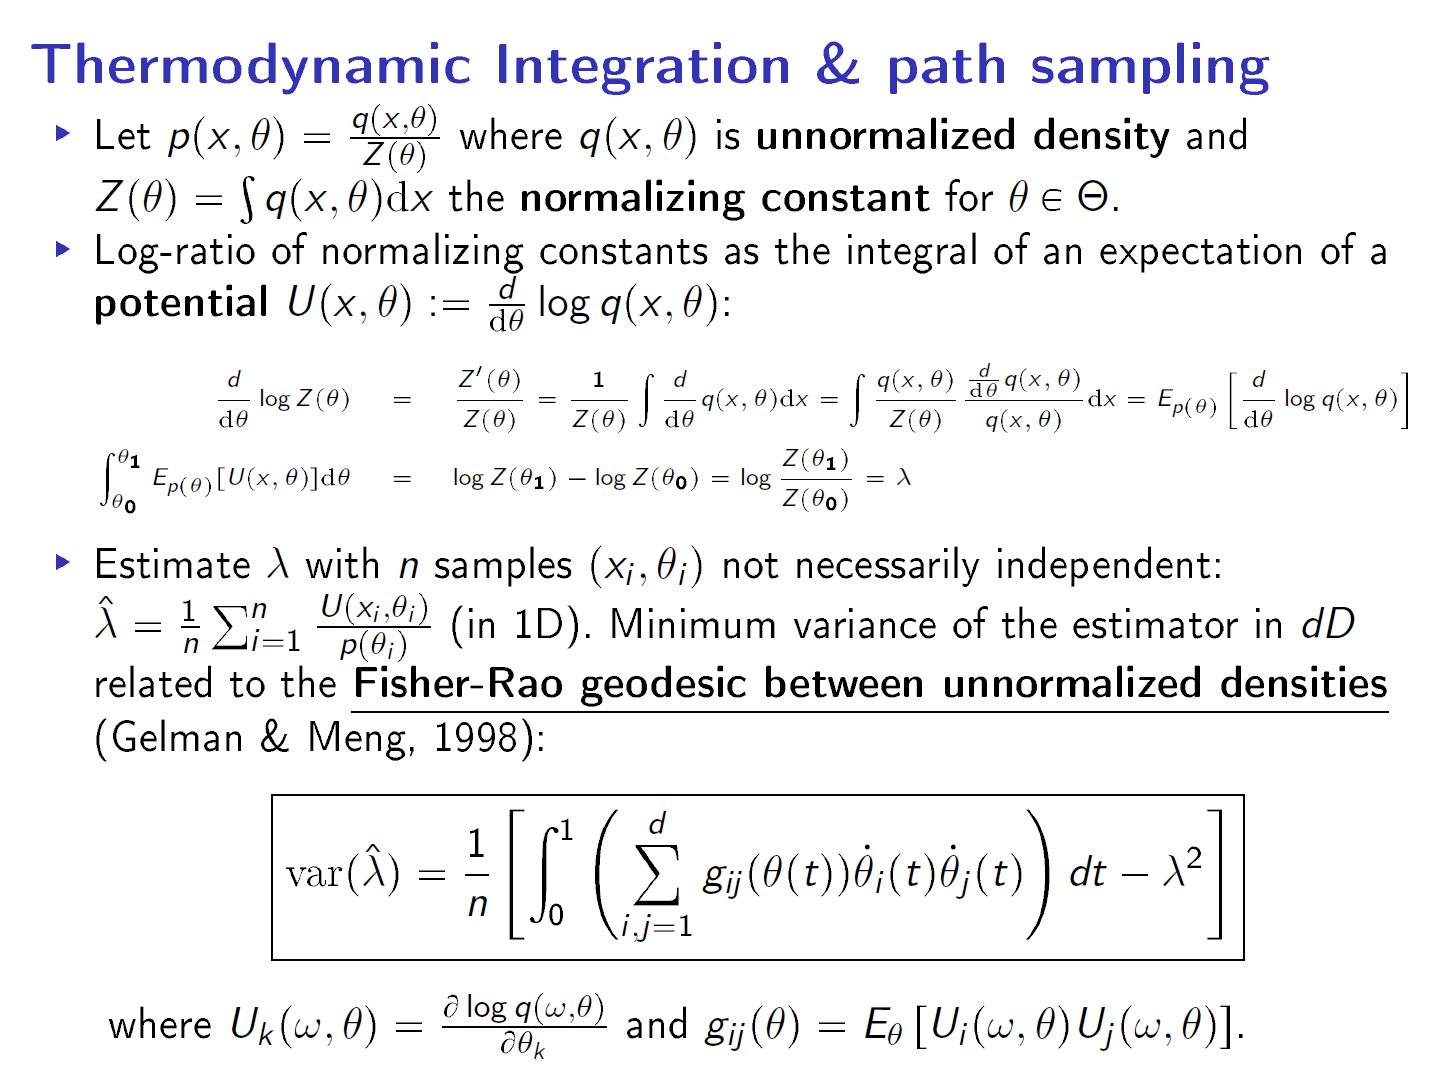 Frank Nielsen A Mltrick Thermodynamic Integration With Fisher Rao Geodesics On Unnormalized Models To Estimate The Log Ratio Normalizing Constants Gelman And Meng 1998 Fisher Rao Geometry T Co Ygxlrrzkvc T Co